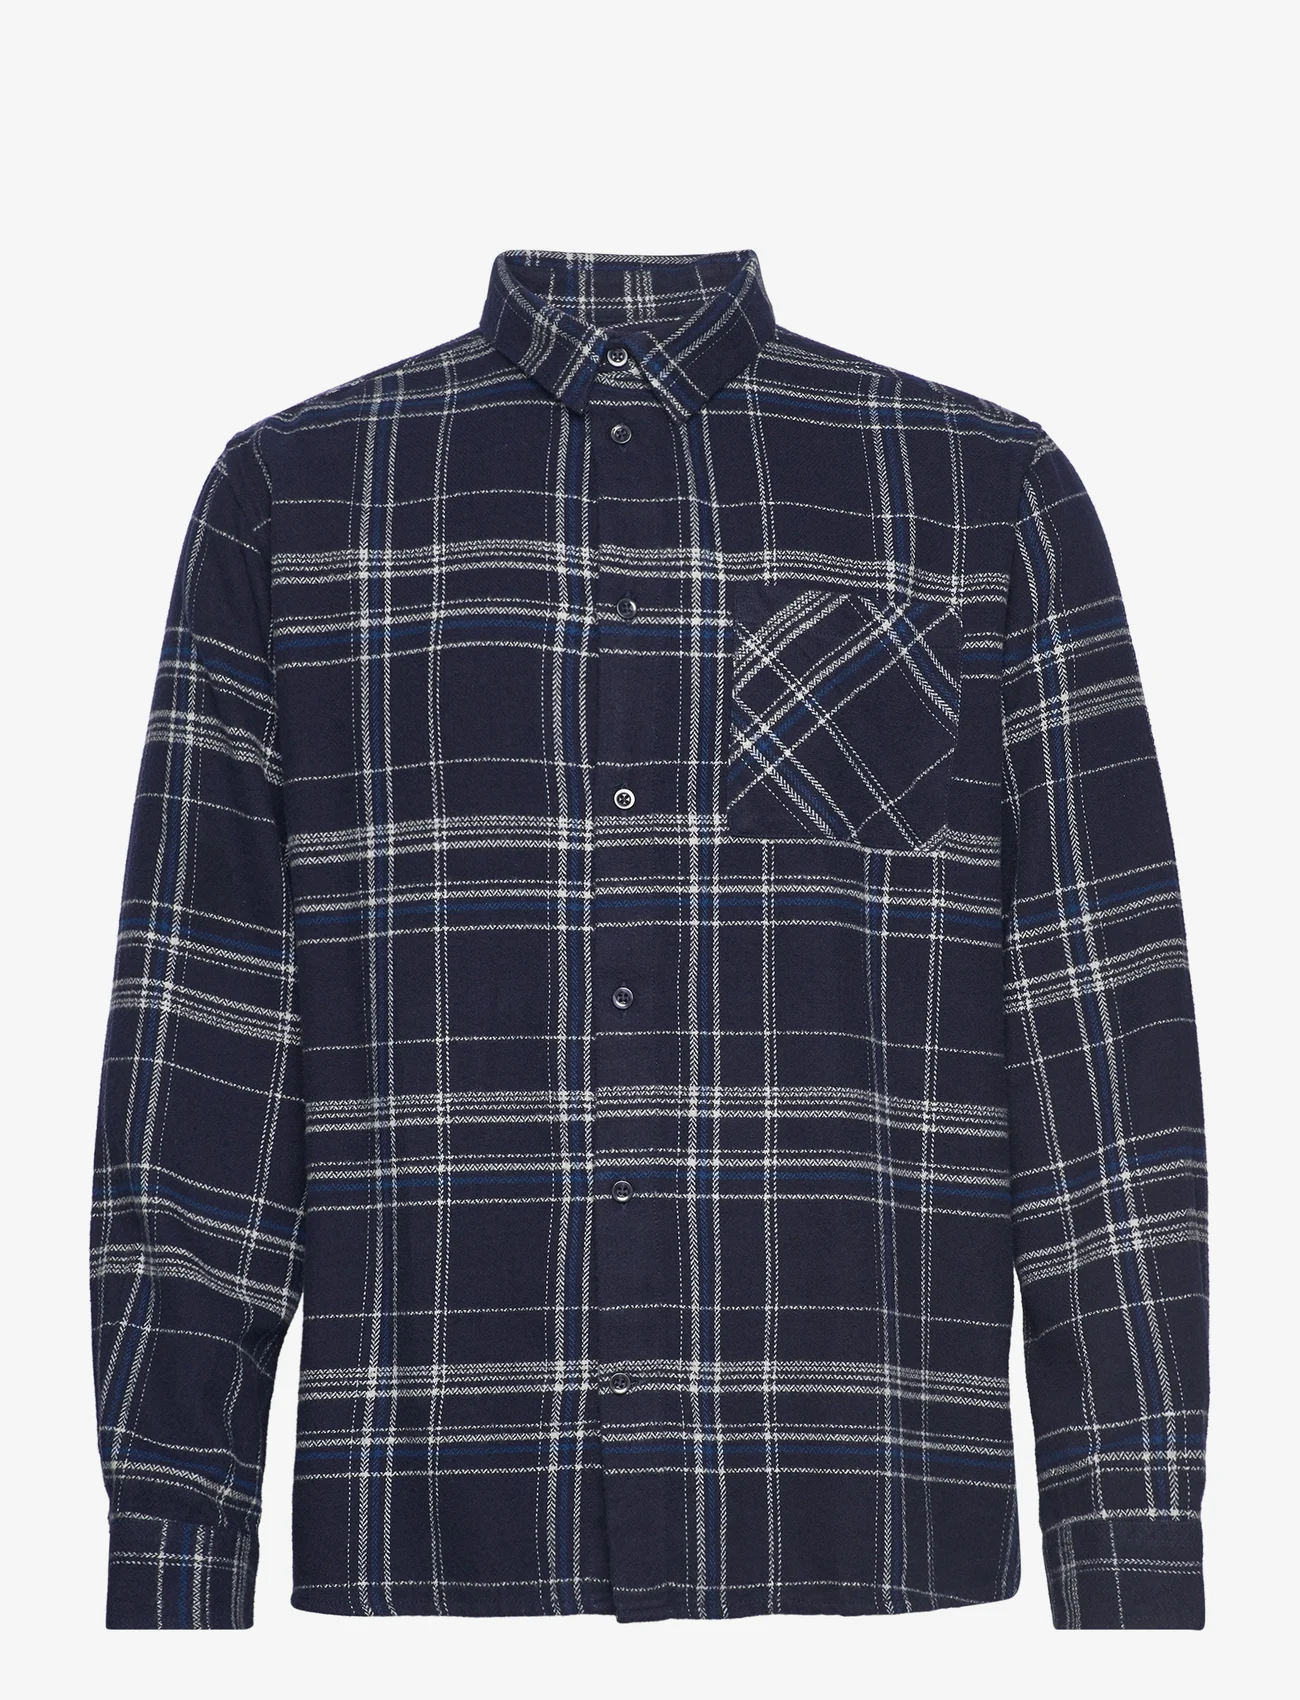 Knowledge Cotton Apparel - Light flannel checkered relaxed fit - geruite overhemden - navy check - 0